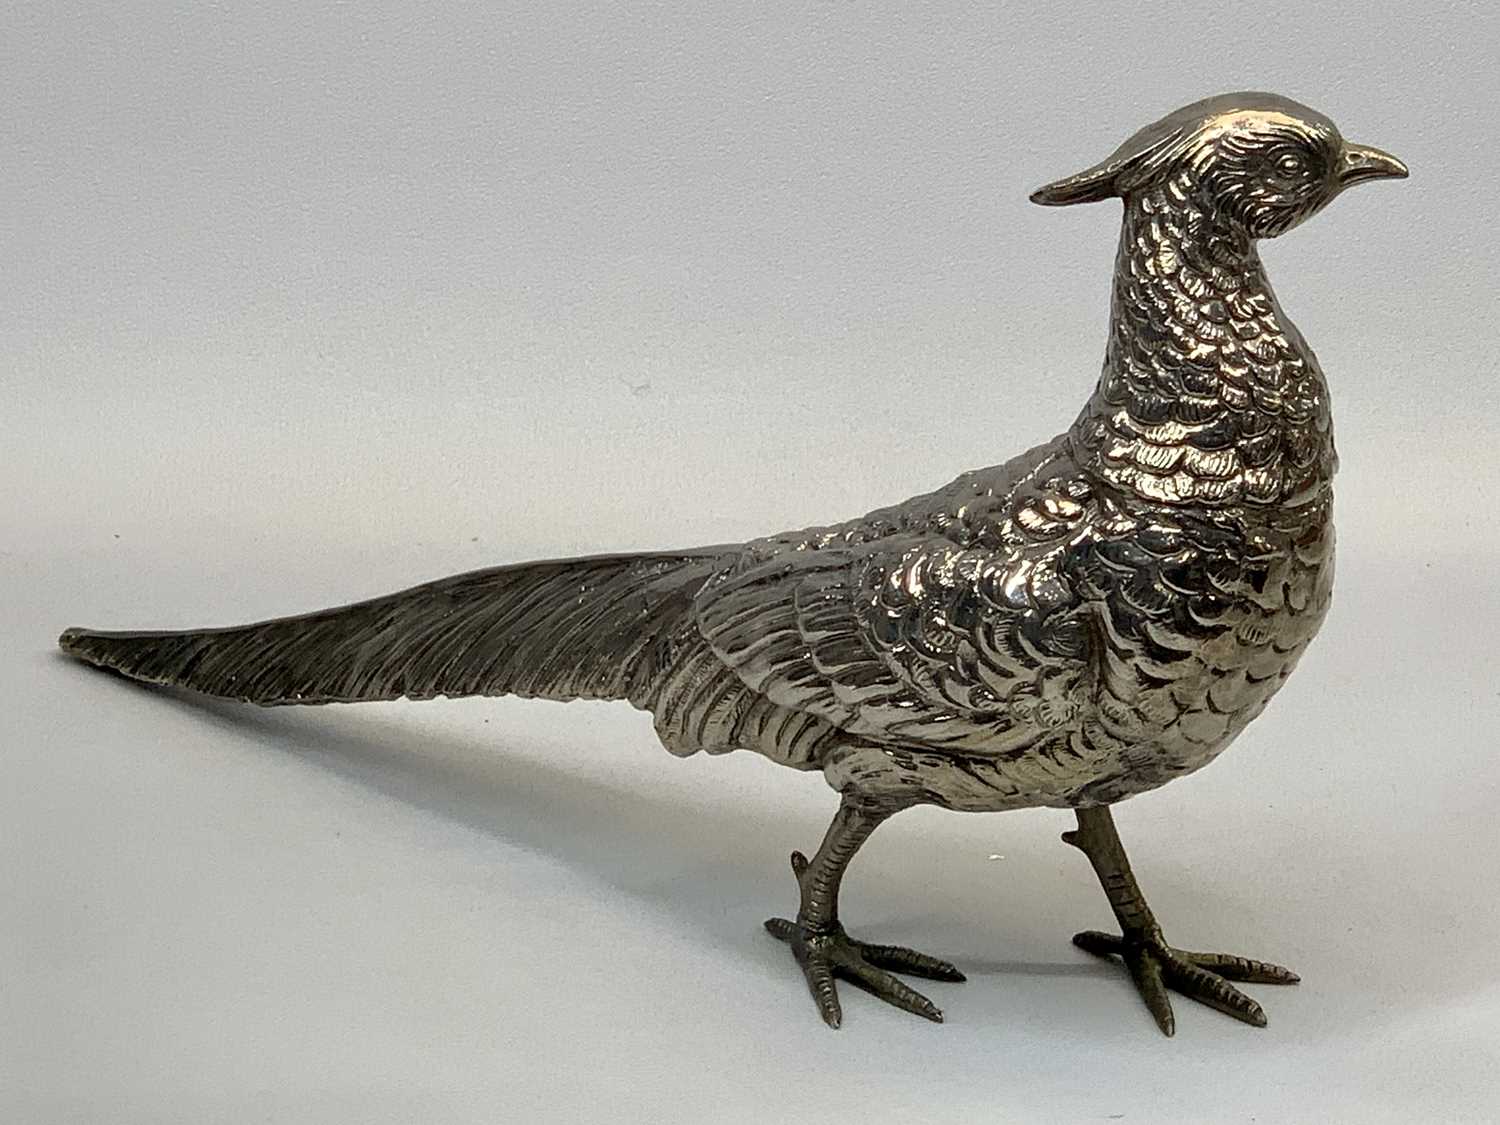 MAURO MANETTI FOR LEGA PELTRO CAST METAL SCULPTURE OF A MALE PHEASANT, maker's marks to the base, - Image 2 of 3